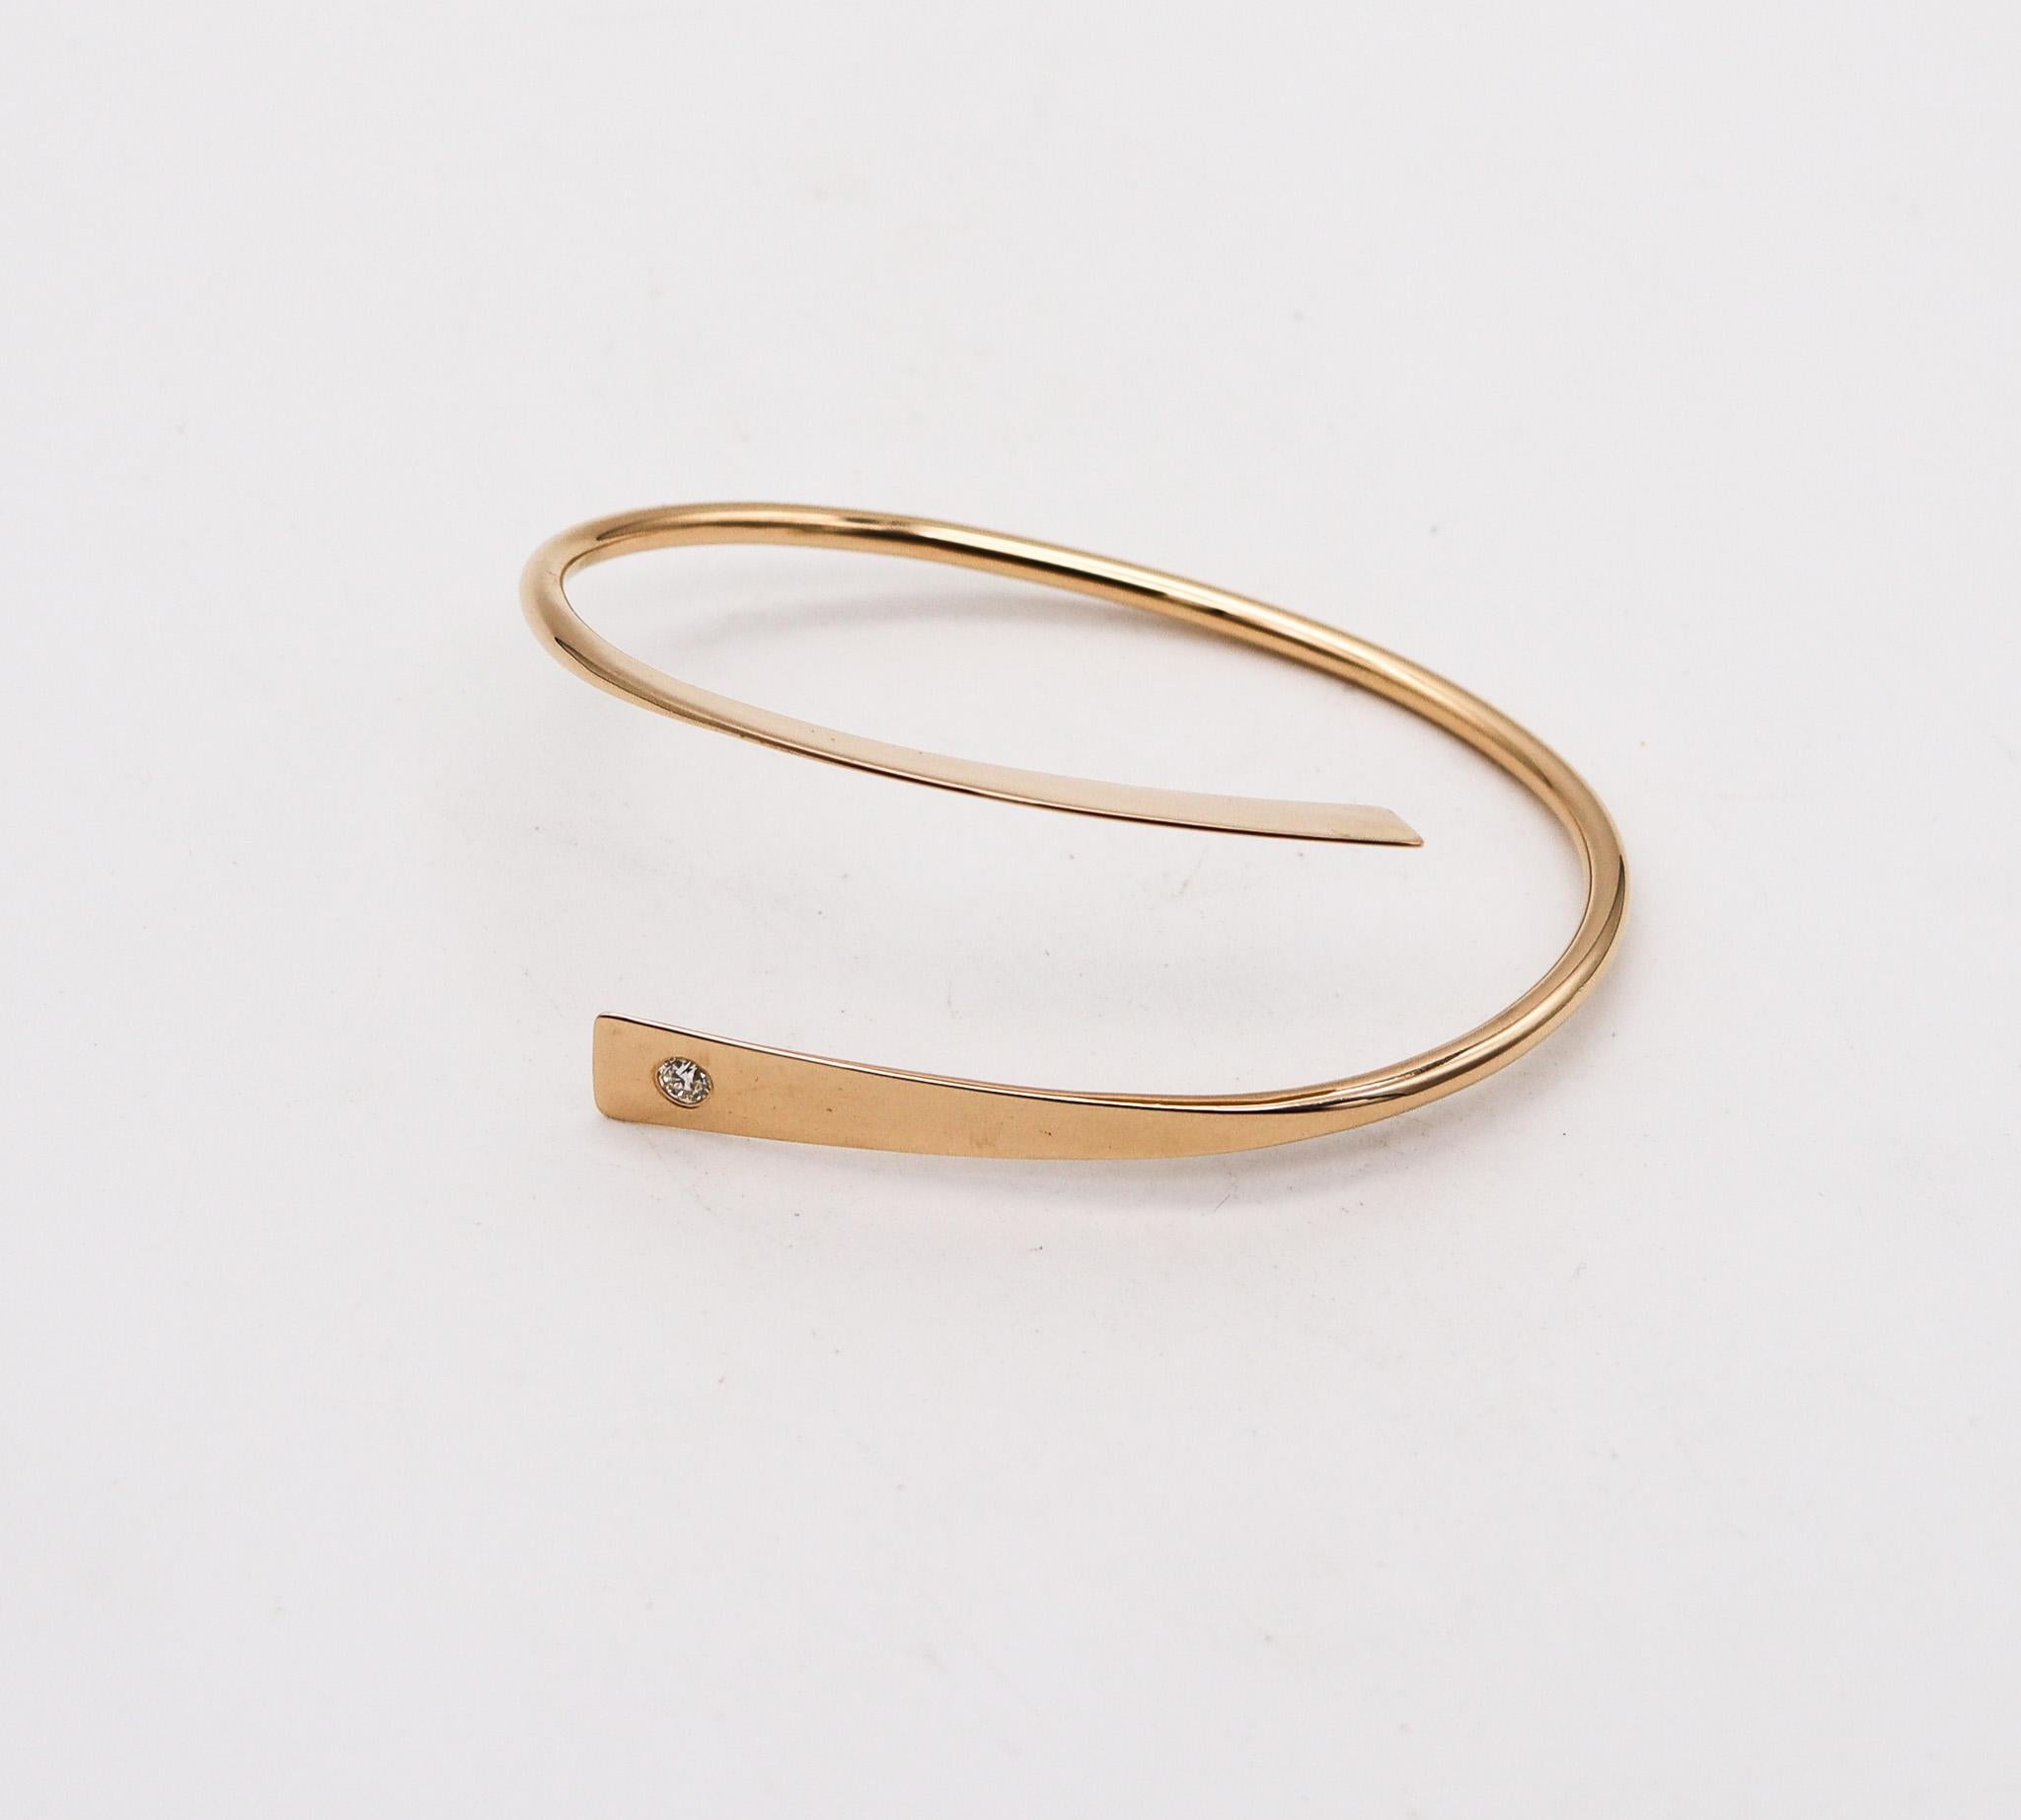 Bangle bracelet designed by Betty Cock.

This is an amazing aerodynamical bangle bracelet, created by the artist-jeweler Betty Cooke. The sculptural bracelet has been crafted as a simple twisted and flattened element, made up in solid yellow gold of